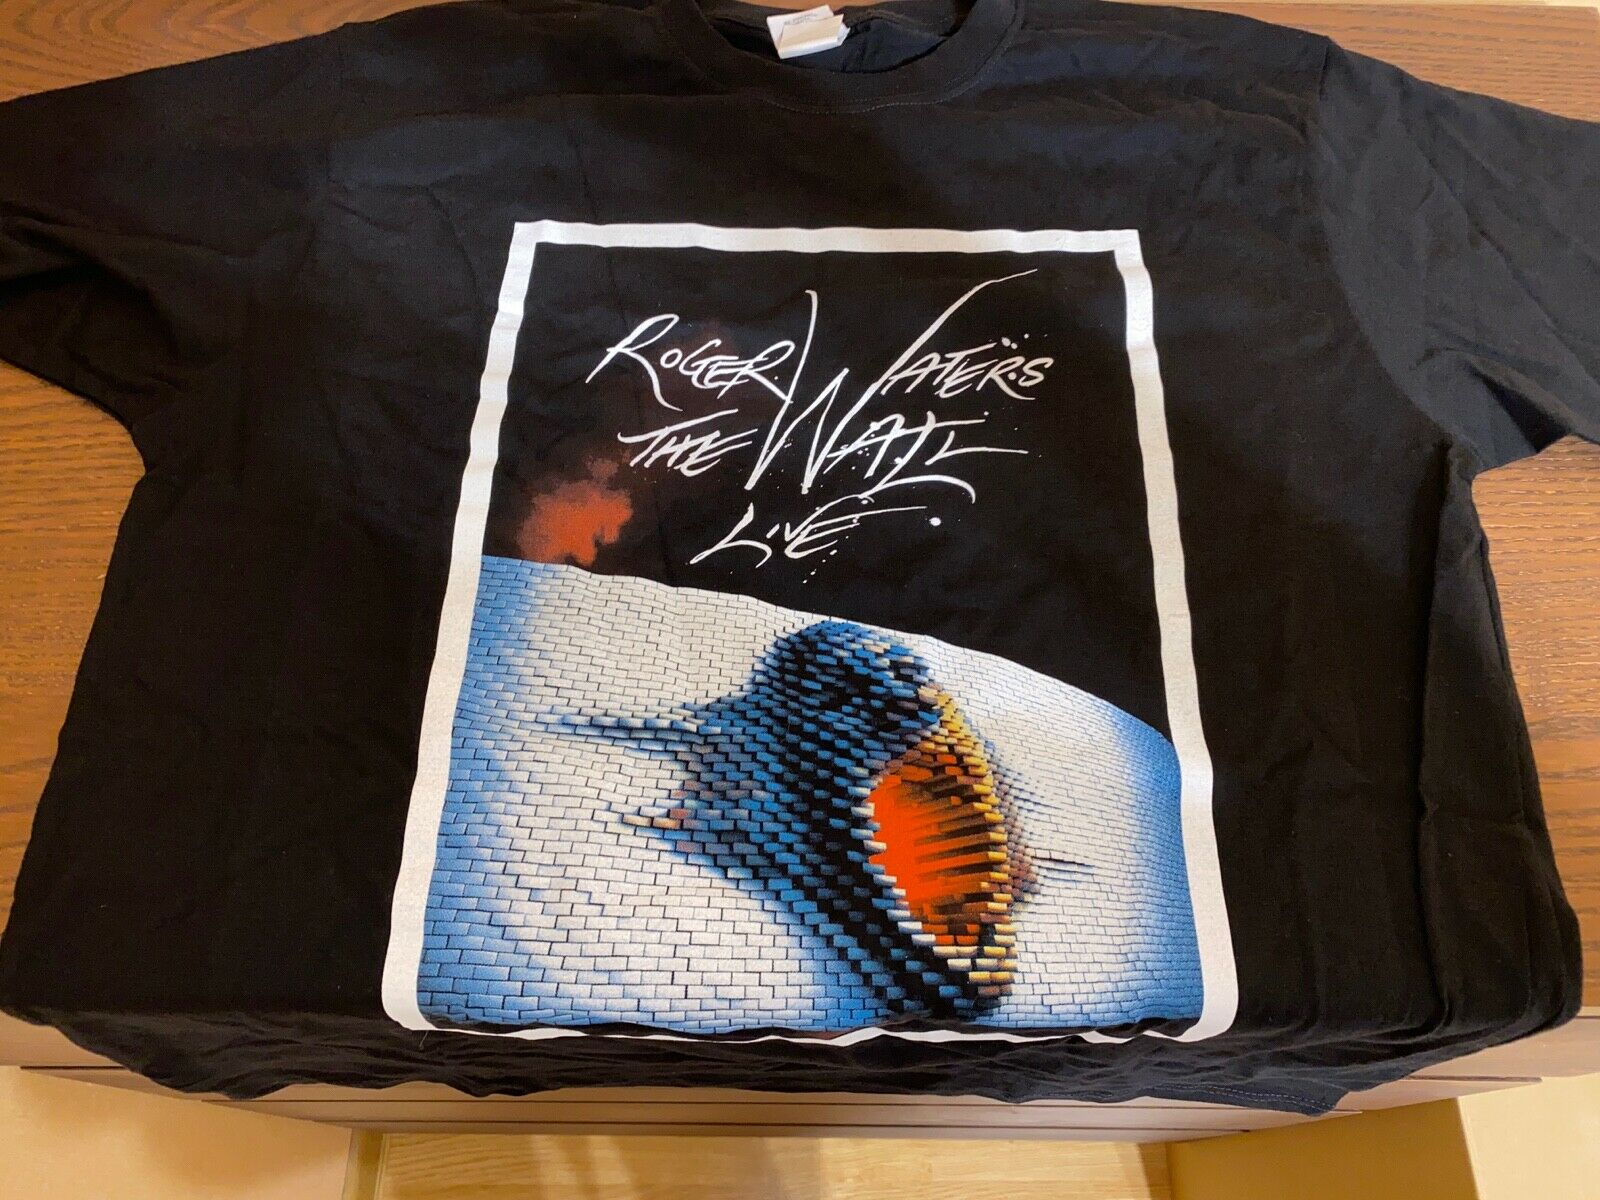 Roger Waters The Wall Live Tour 2011 T-shirt Men Large Pink Floyd